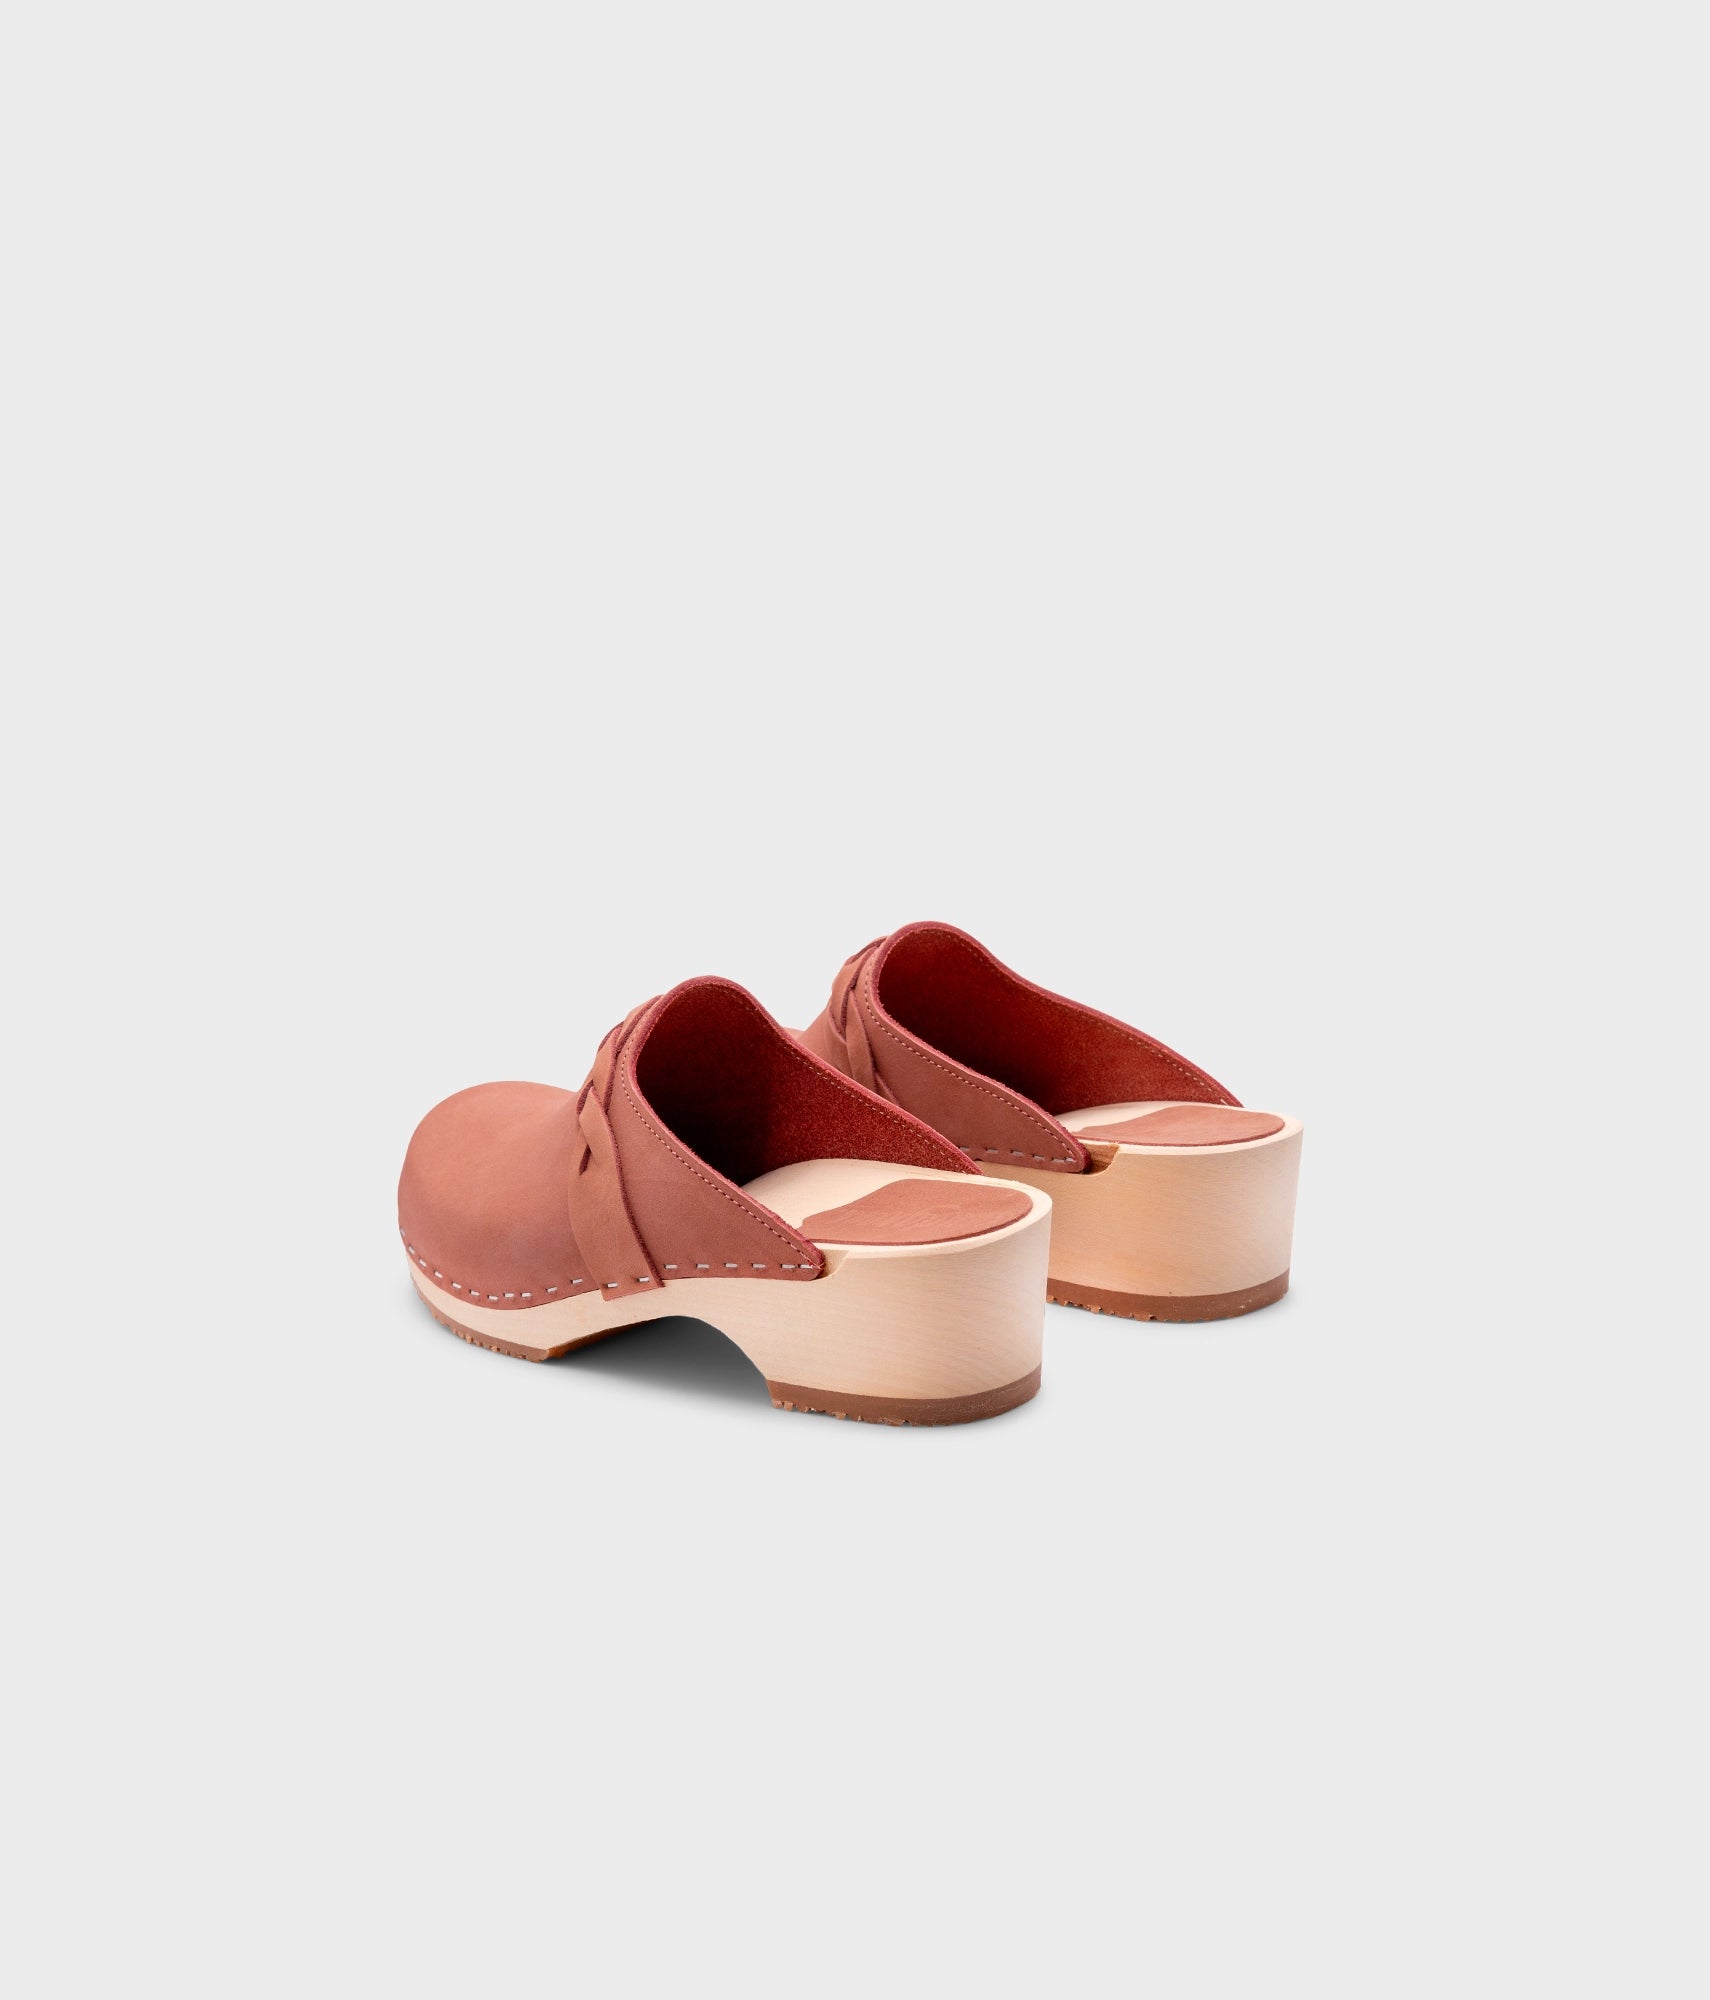 low heeled clog mules in blush pink nubuck leather with a braided strap stapled on a light wooden base